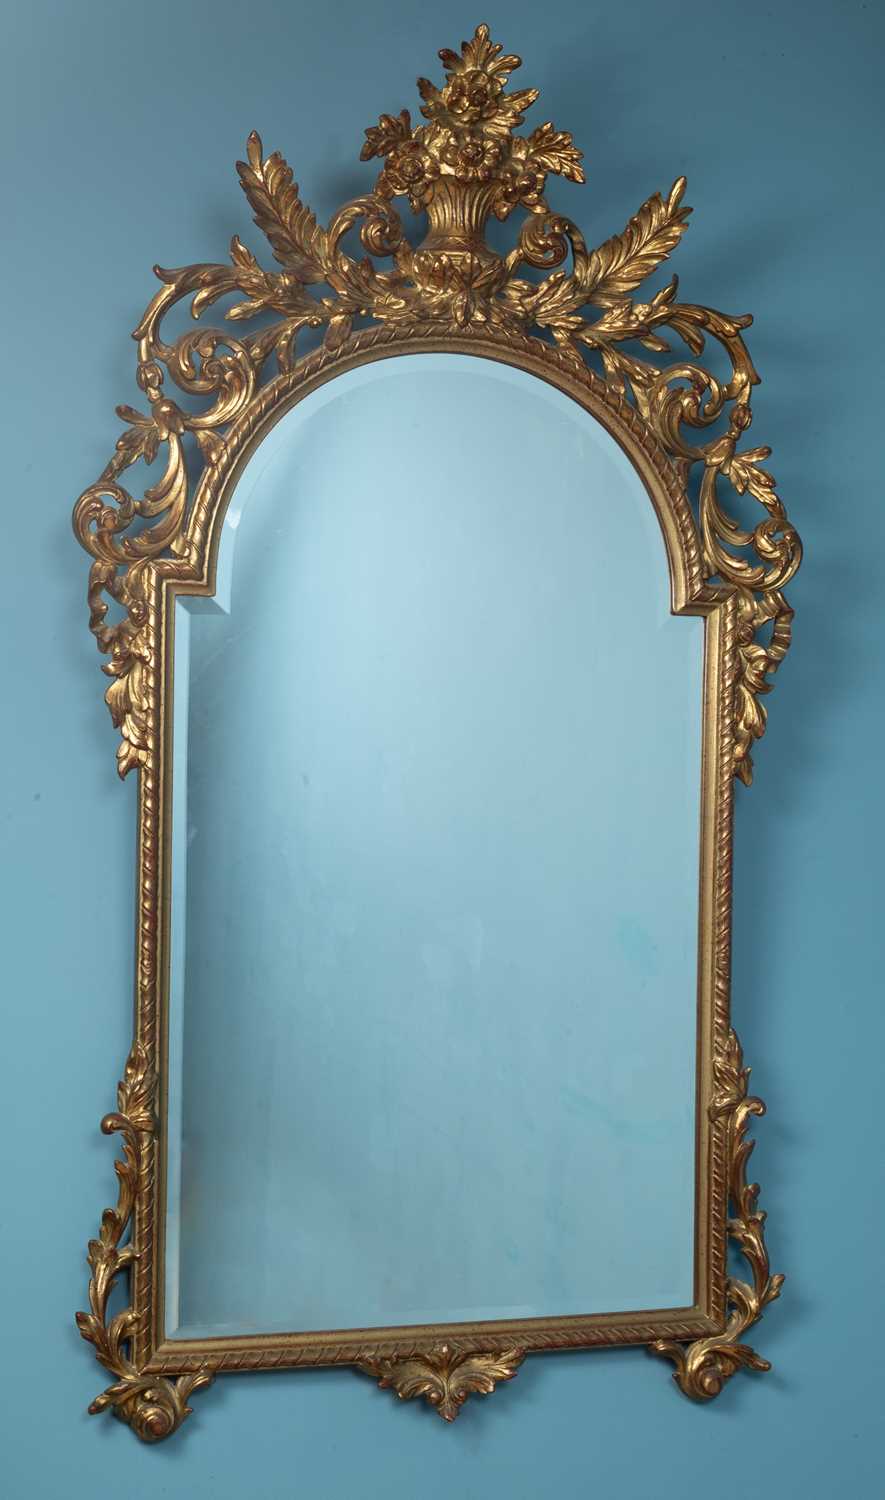 Lot 98 - An 18th century Baroque style giltwood mirror